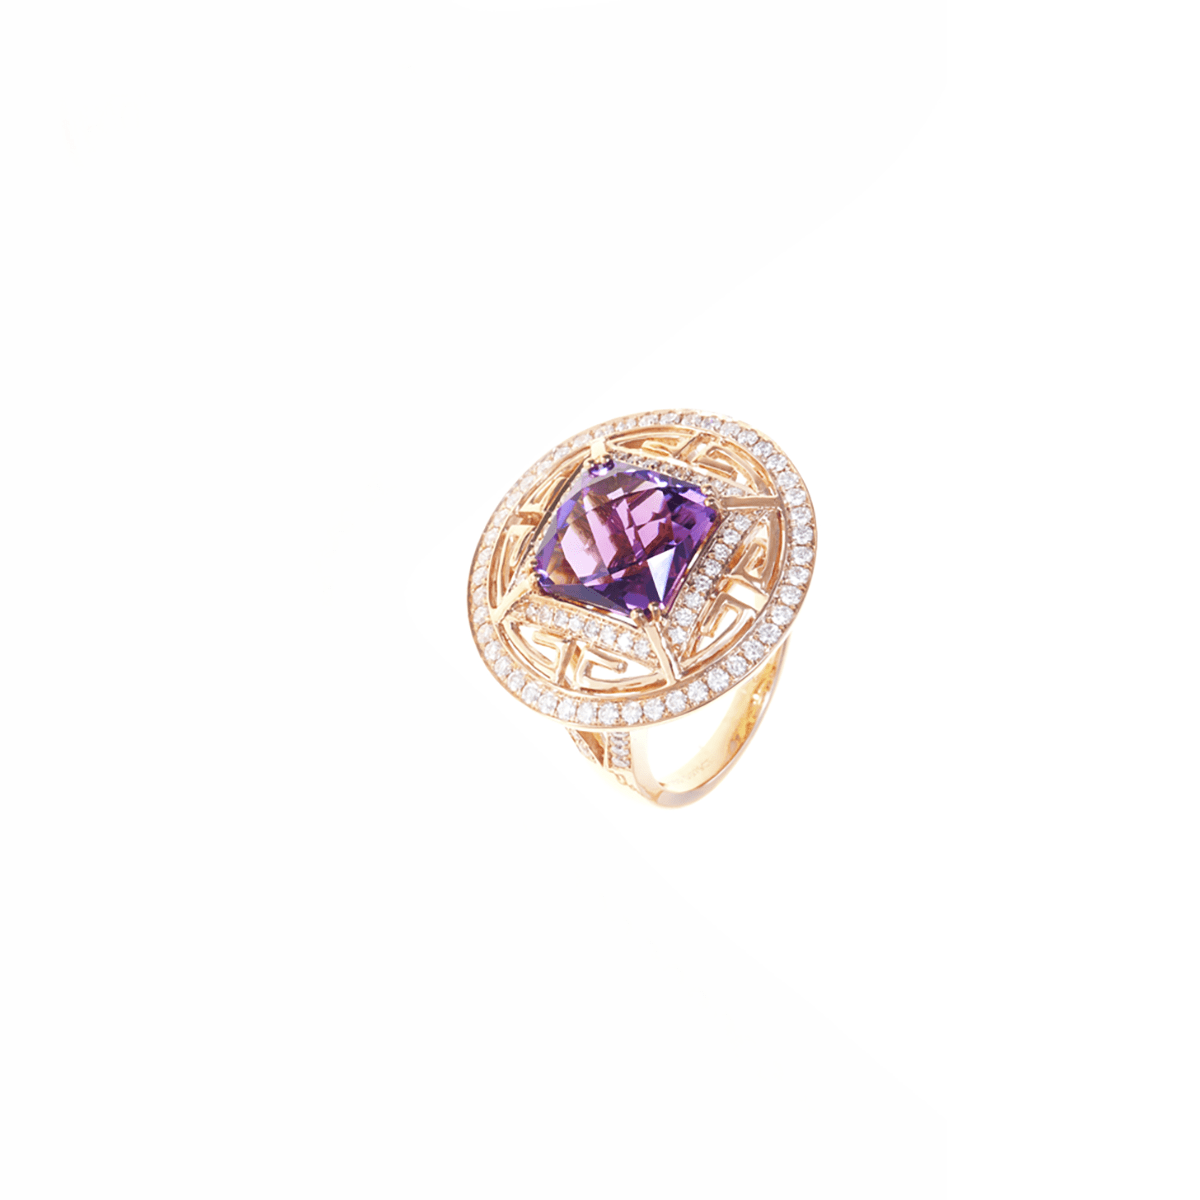 Women’s Ring - Chameleon Ring - Amethyst and Diamonds Ring - RED GOLD®